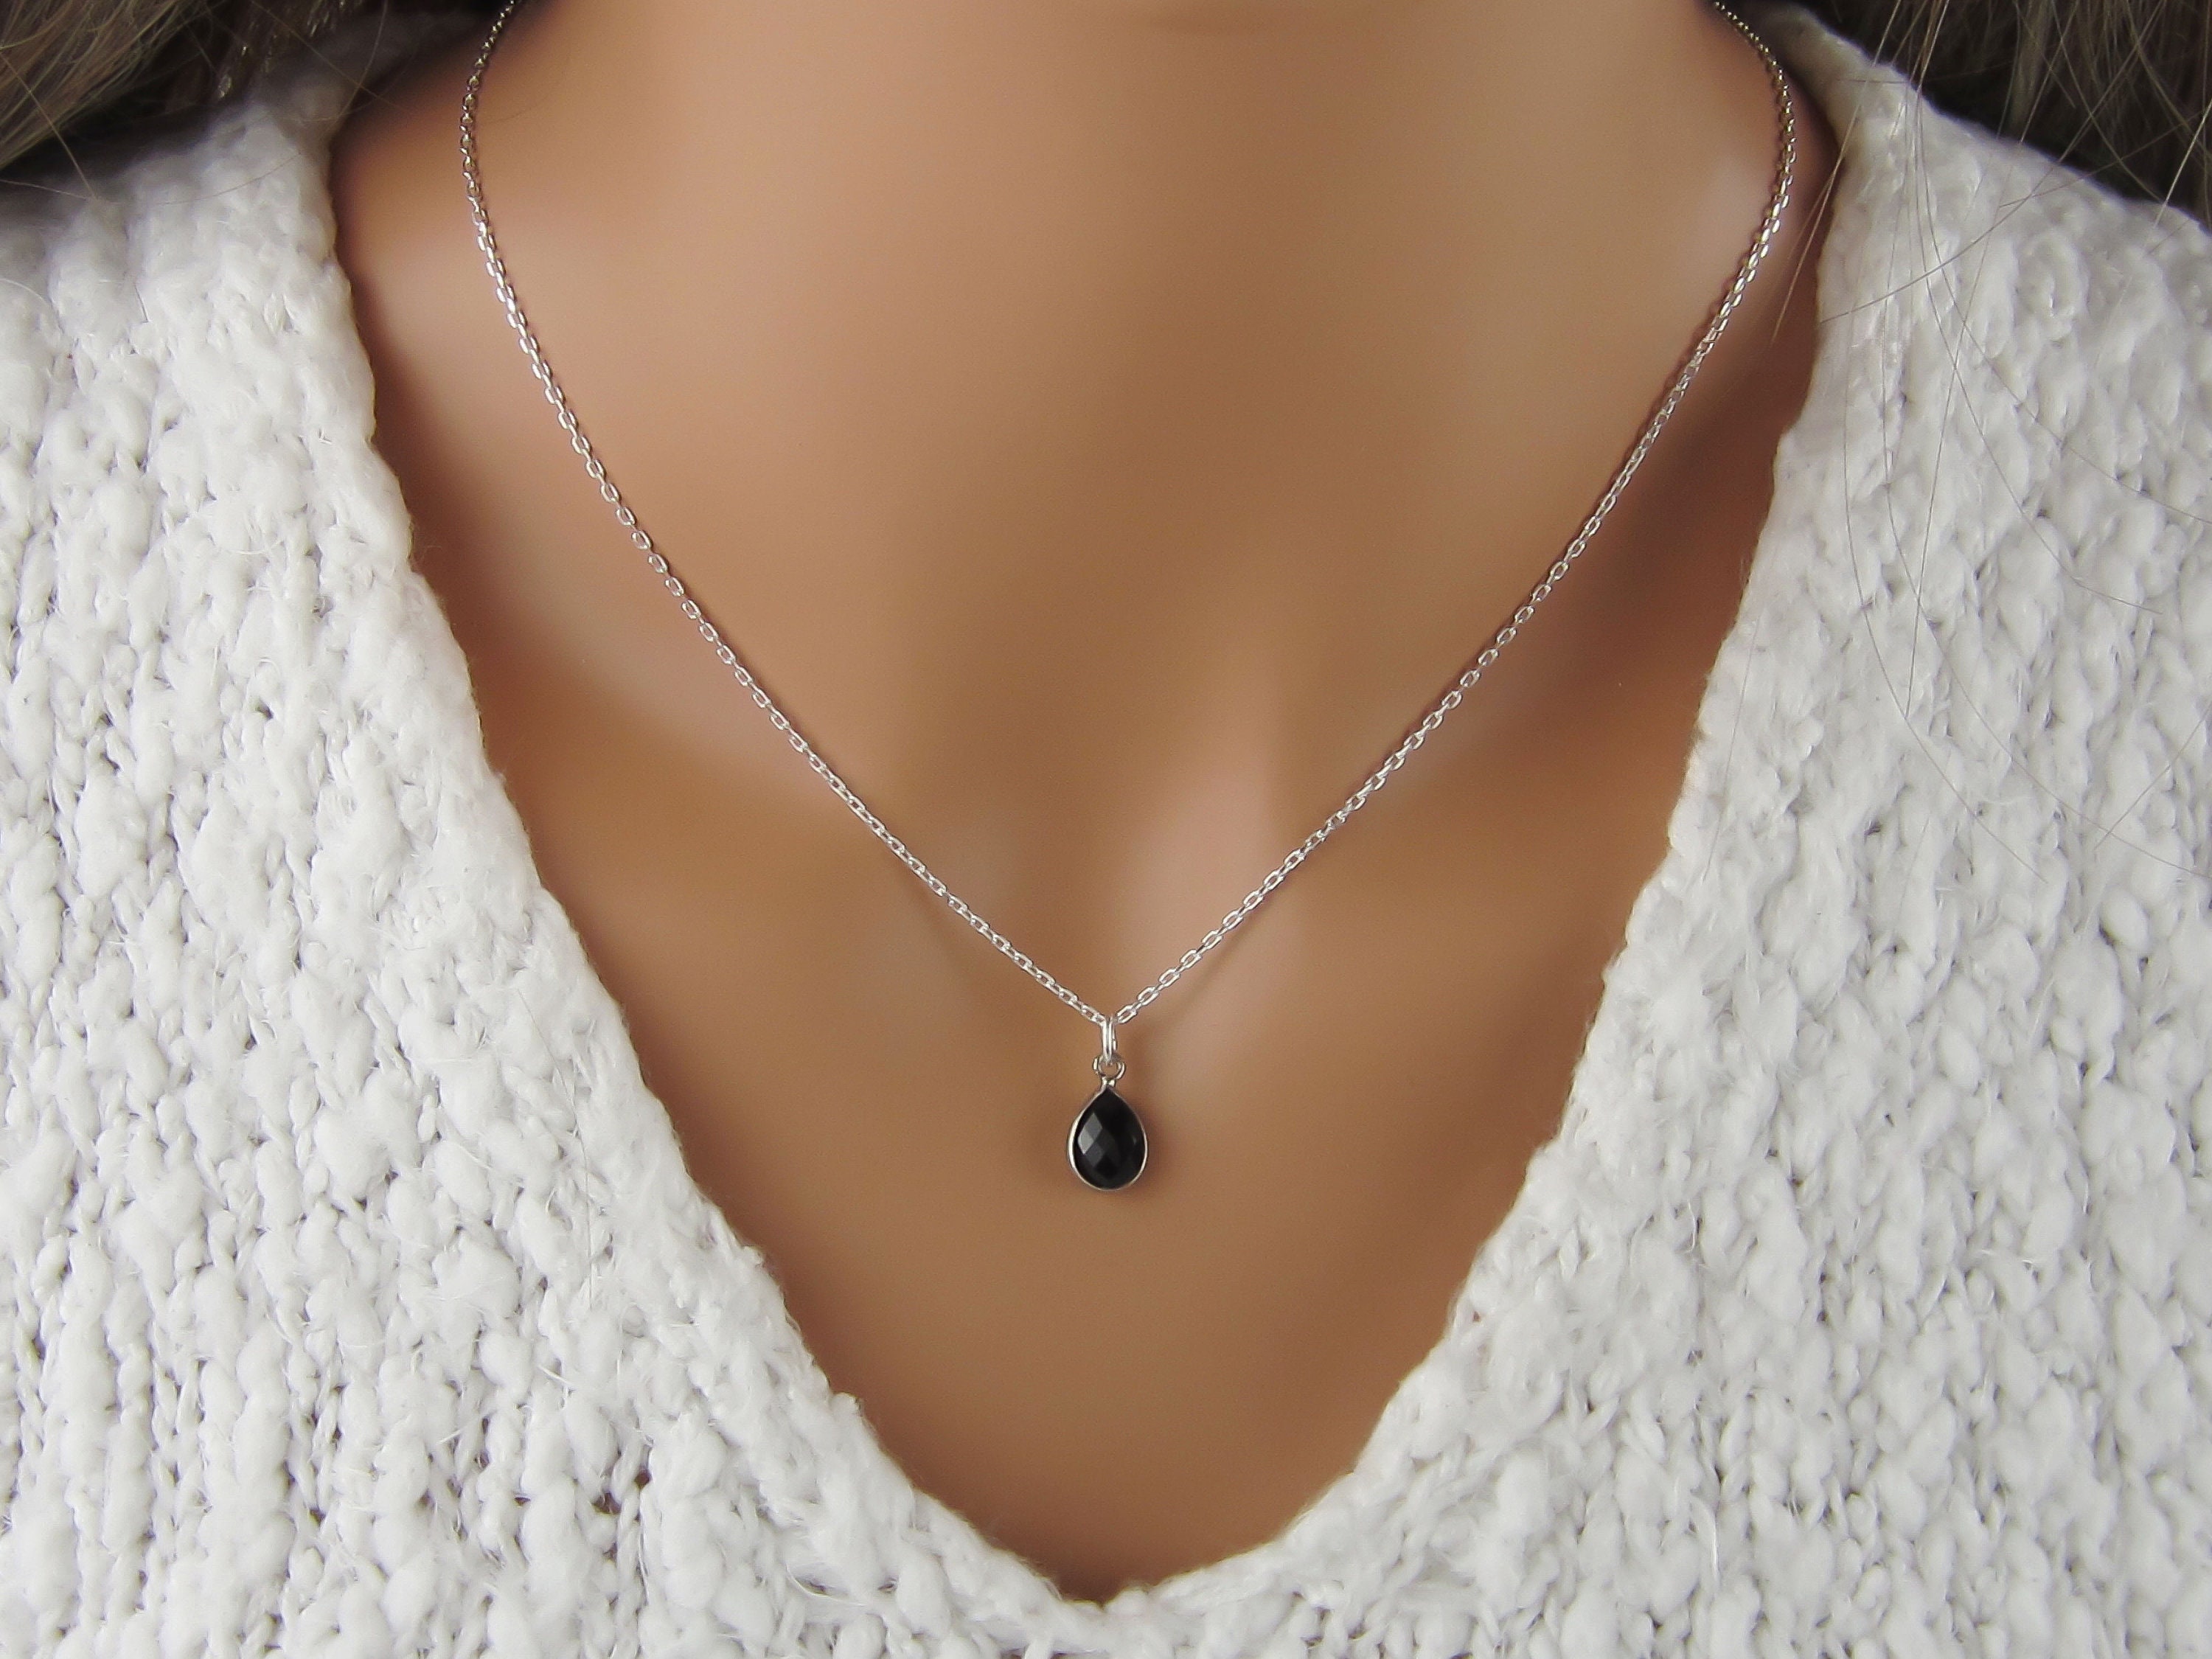 Black Onyx Teardrop Necklace Natural Onyx Gemstone Charm 925 Sterling Silver  Jewelry Tear Drop Charm Pendant Faceted Black Onyx - Etsy